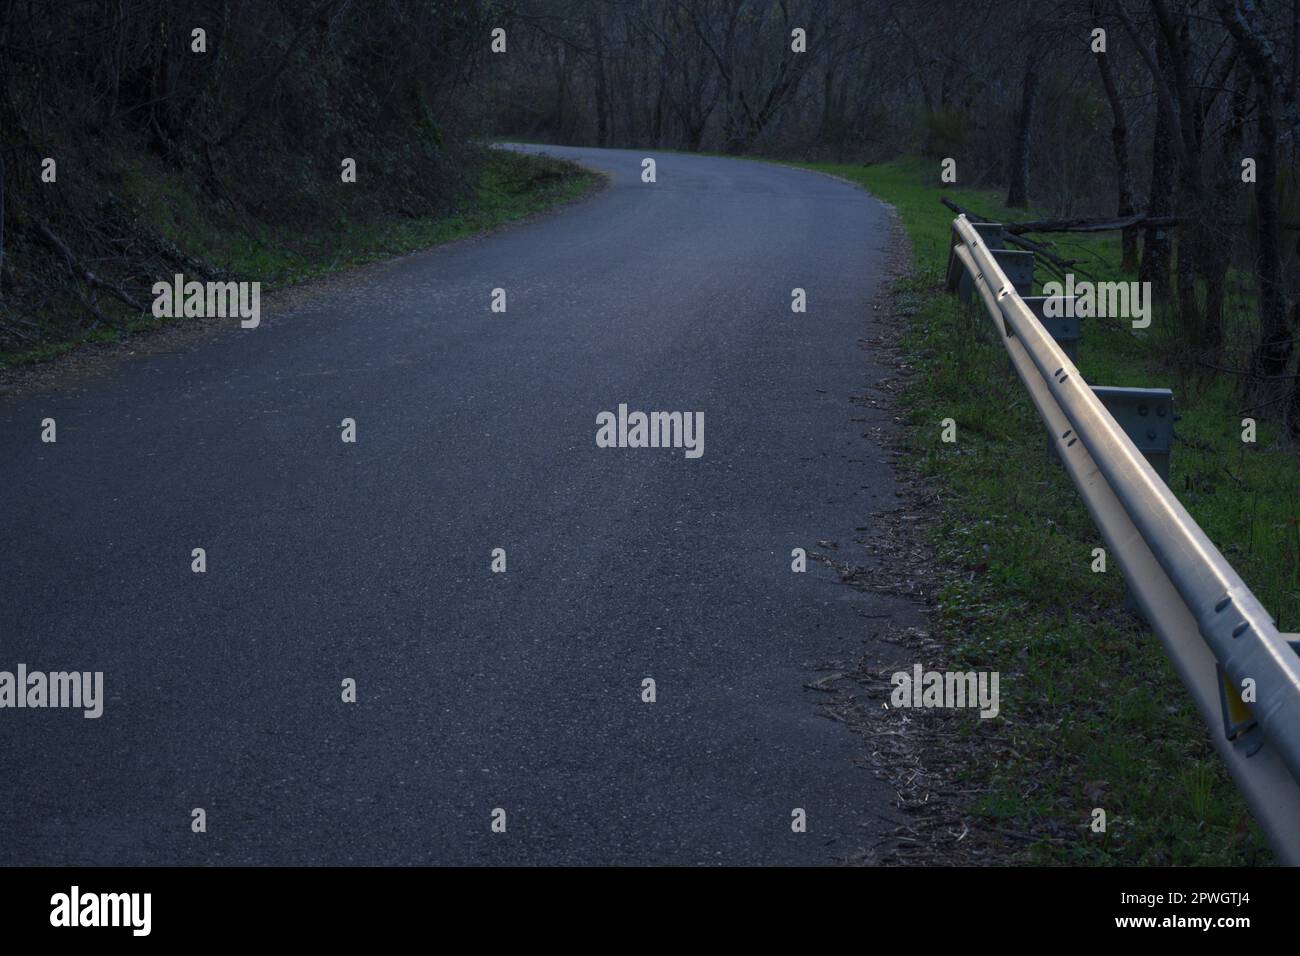 Dark road with side guard rails on hairpin bend with trees Stock Photo